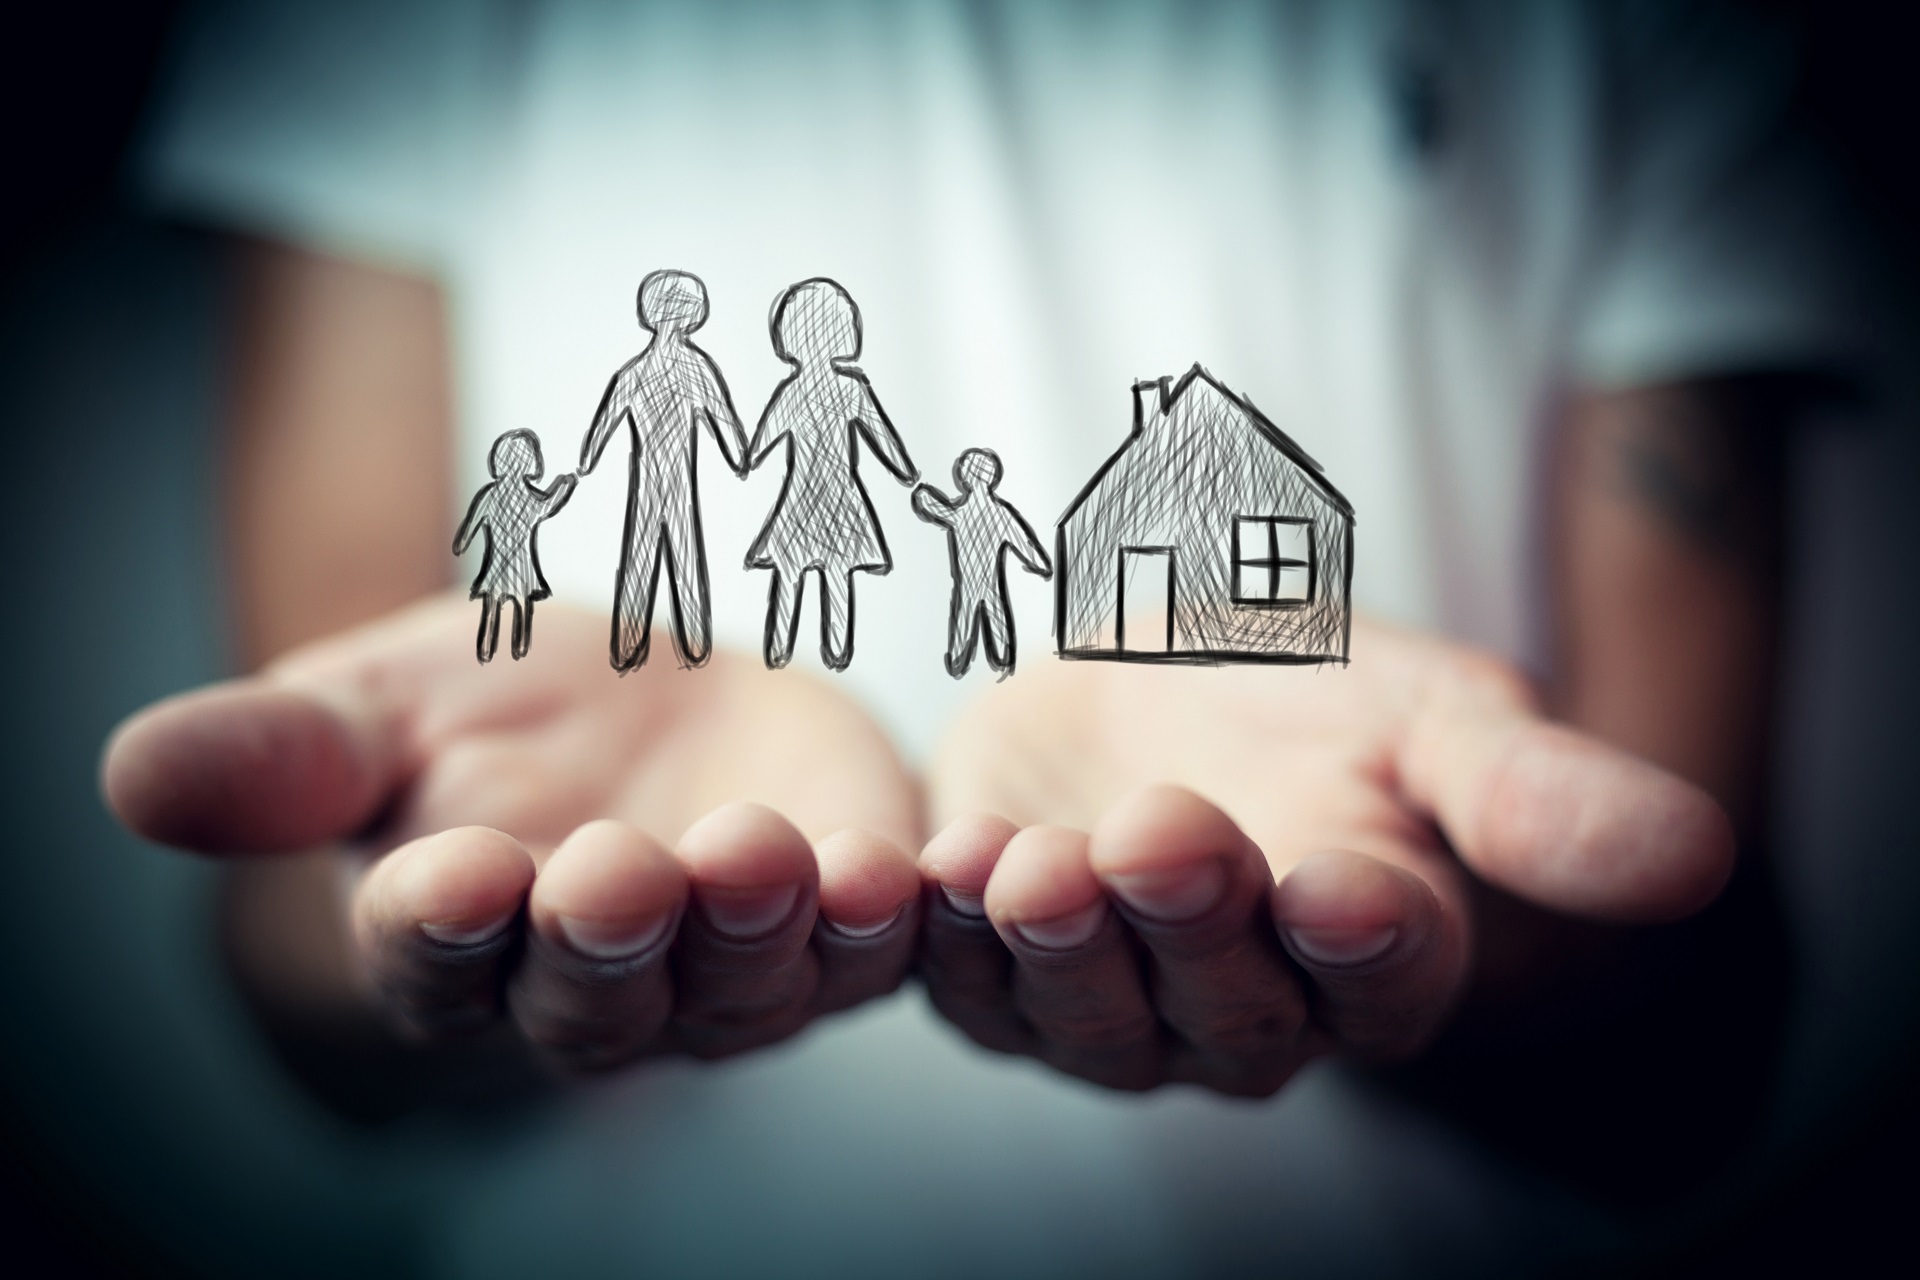 Family Care And Protection Insurance Concept | Estate Planning Law Firm​ in WA | Legacy Law Group